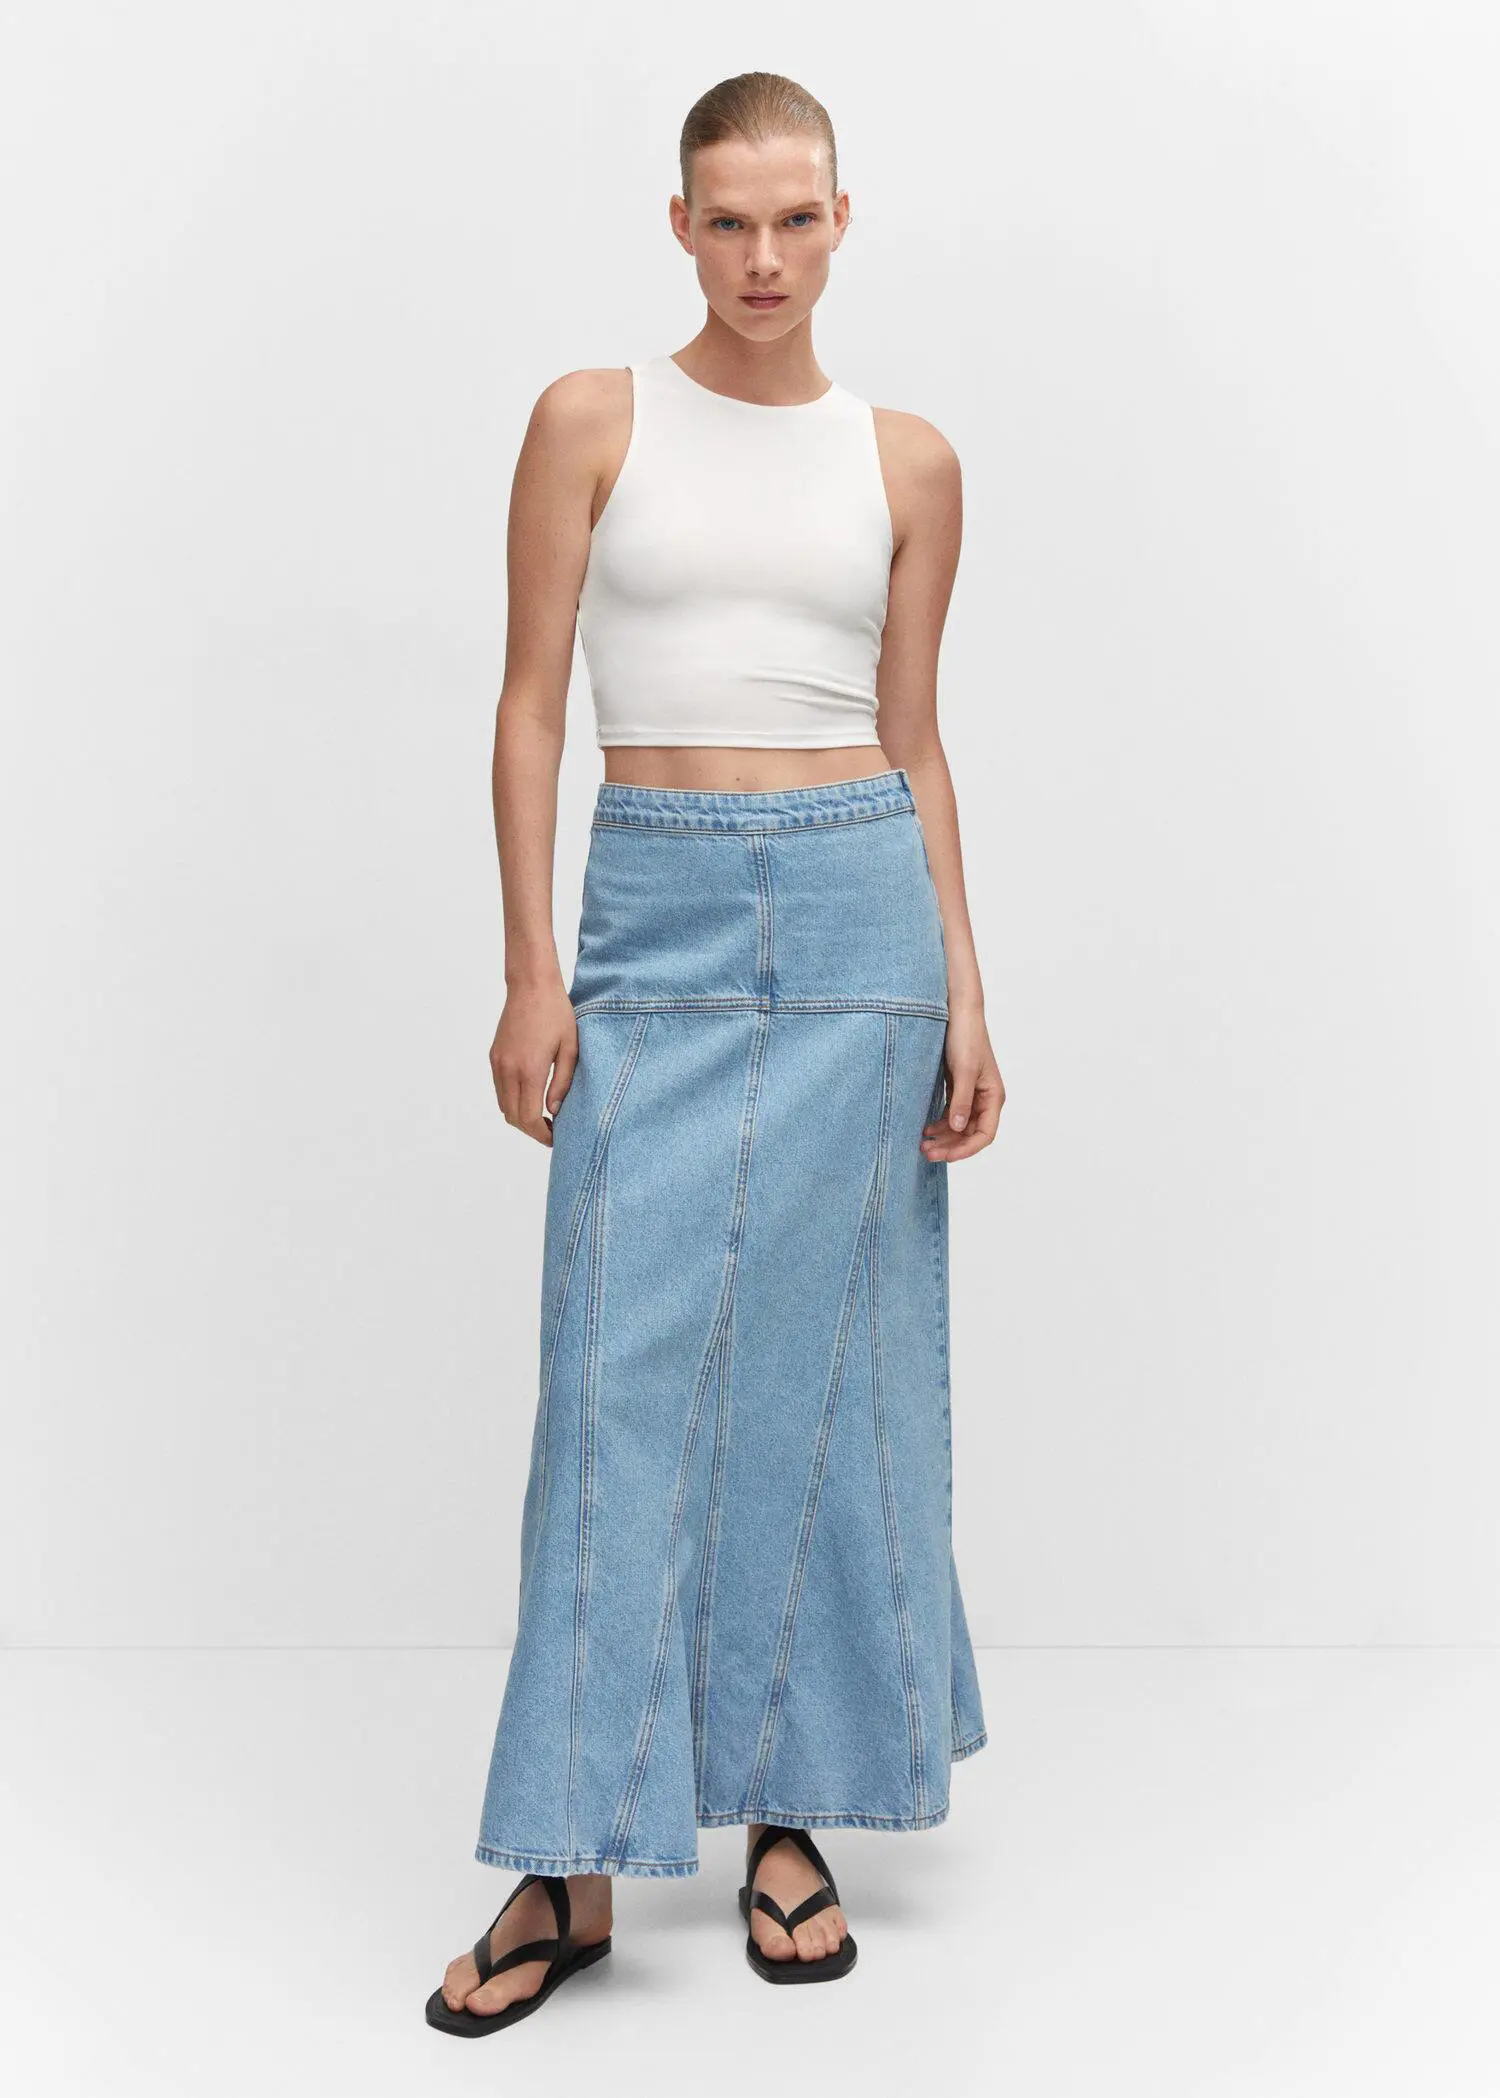 Mango Long denim skirt with seams. a woman wearing a white top and a long skirt. 